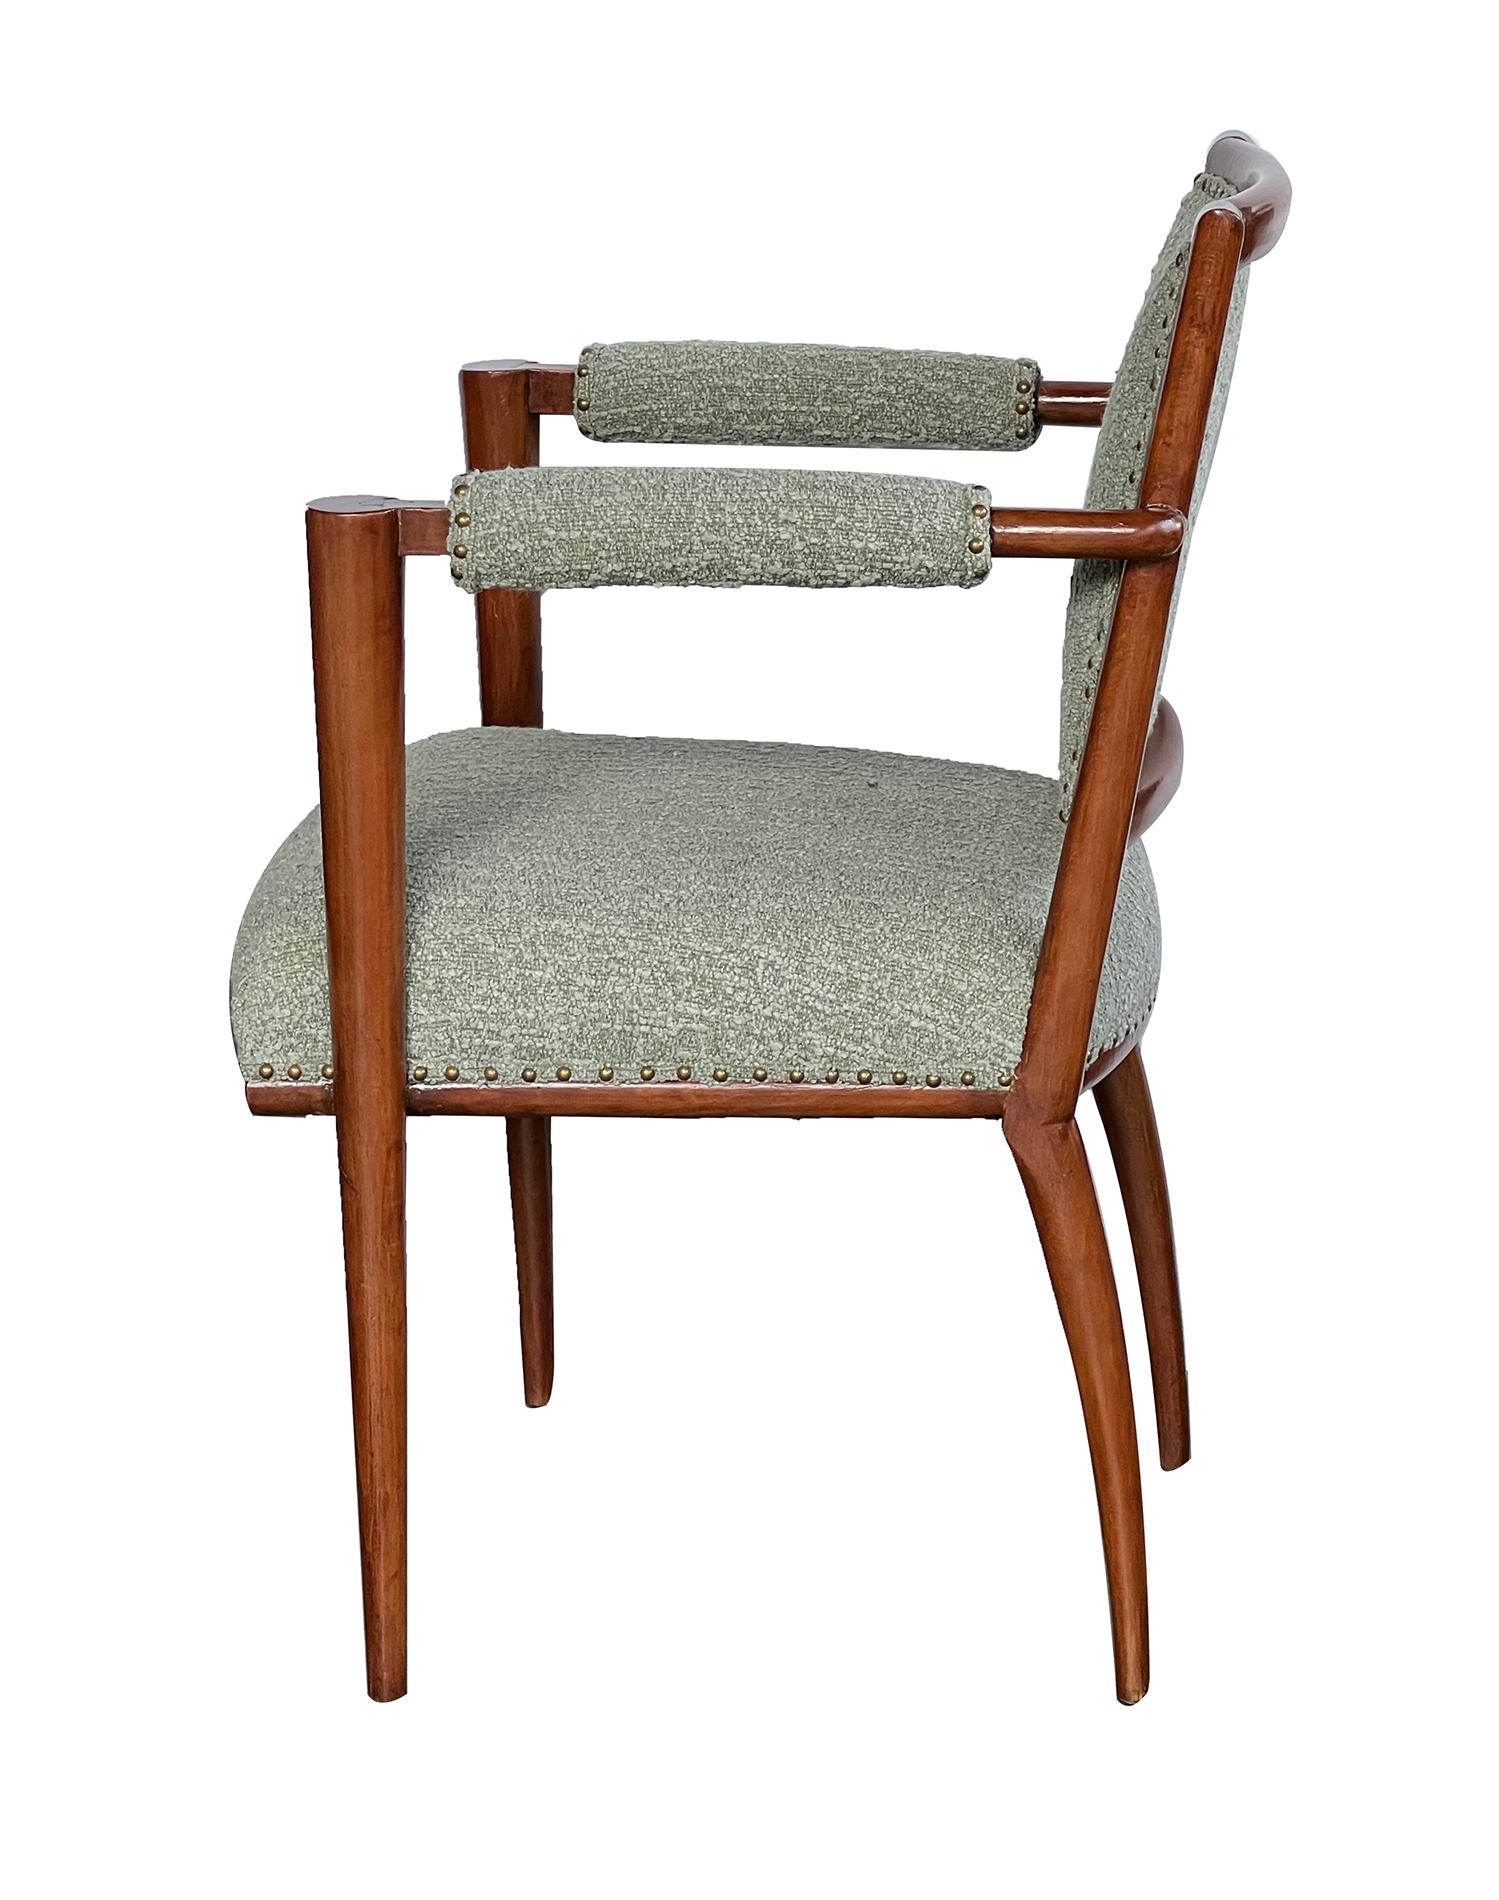 each of graceful art deco design with gently incurved upholstered back flanked by padded arms joining conical terminals; all above a tight seat raised on tuned supports